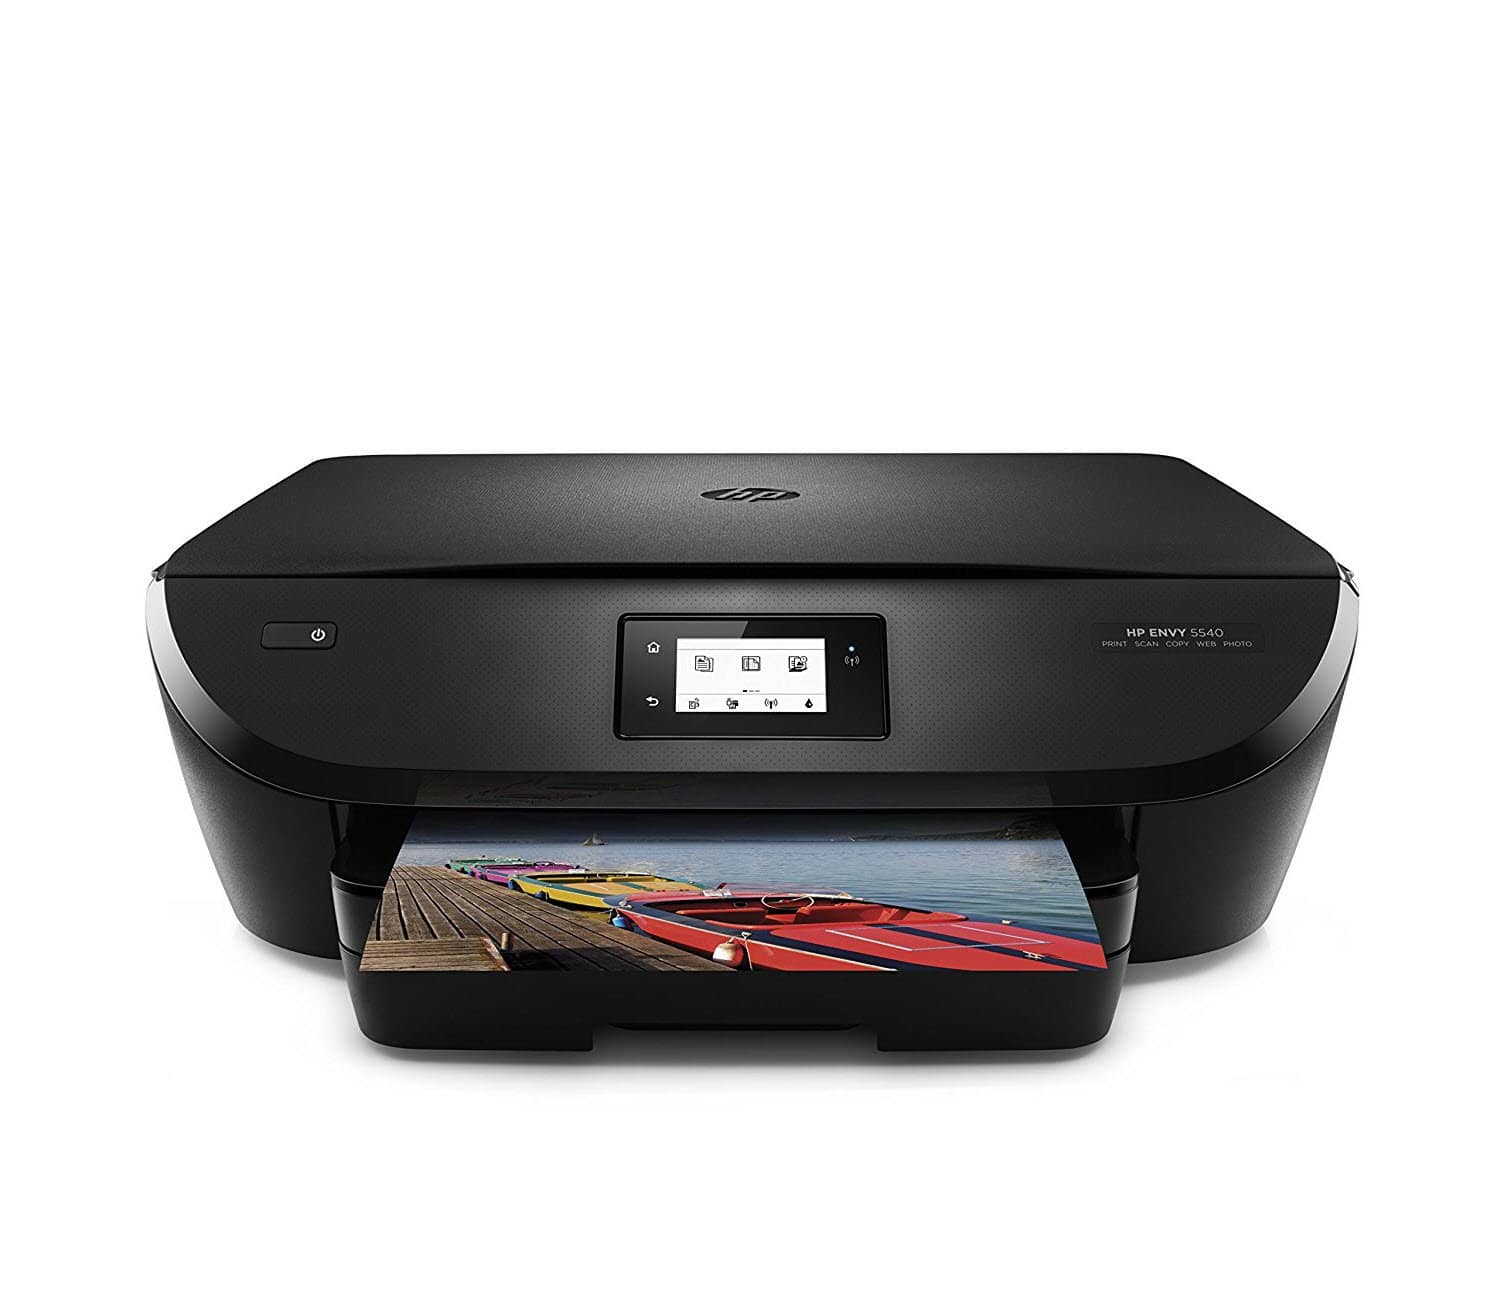 HP Envy 5540 Wireless All-in-One Photo Printer